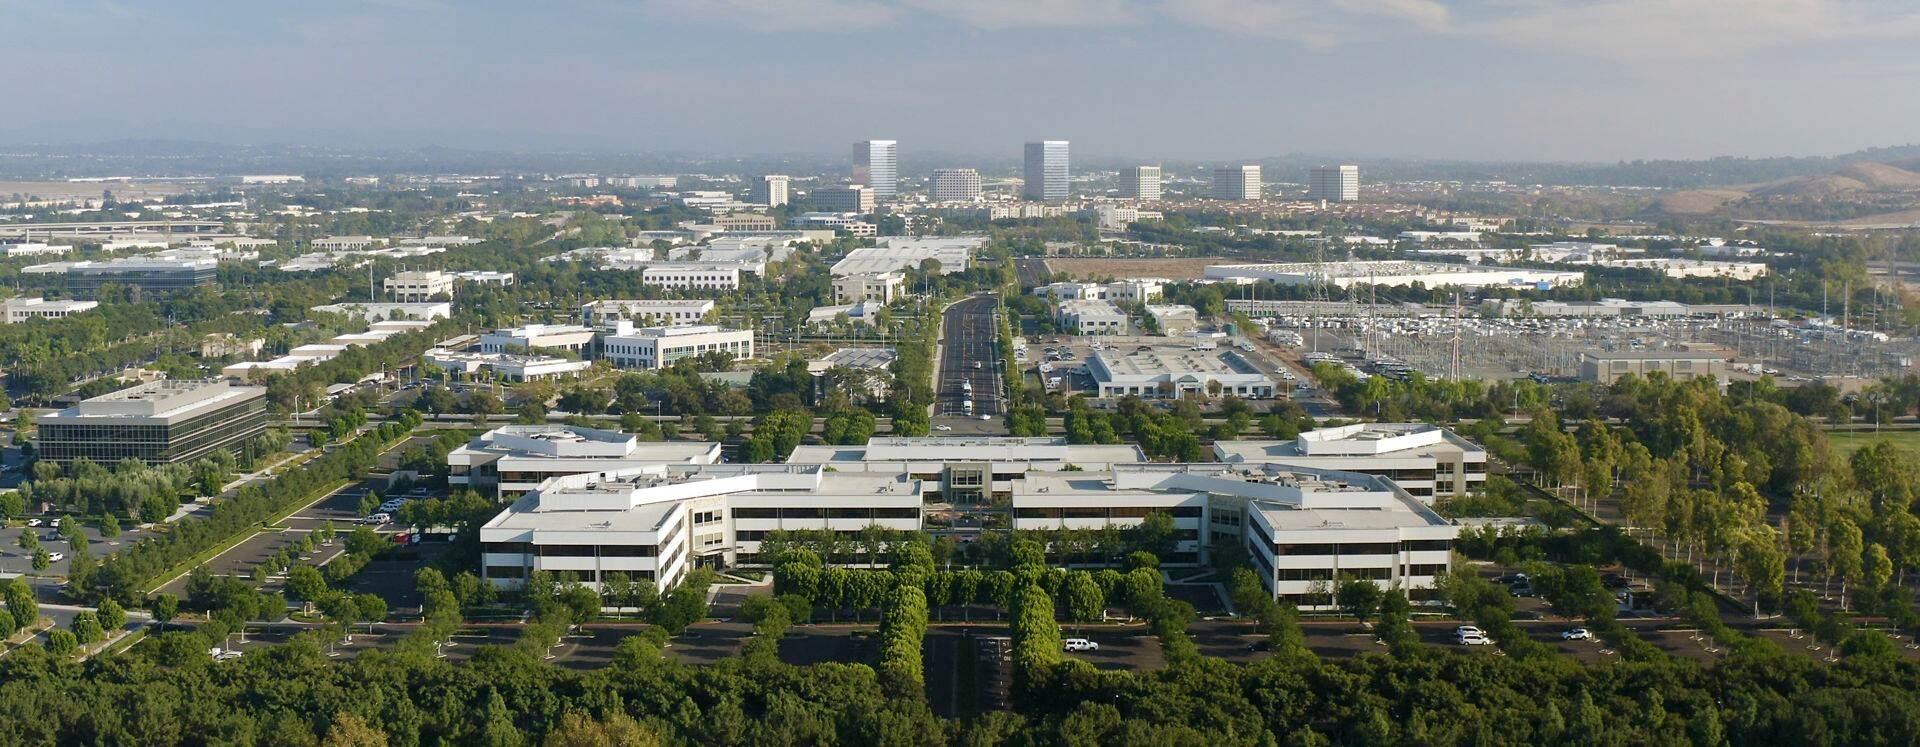 Aerial view of Sand Canyon Business Center in Irvine, CA.